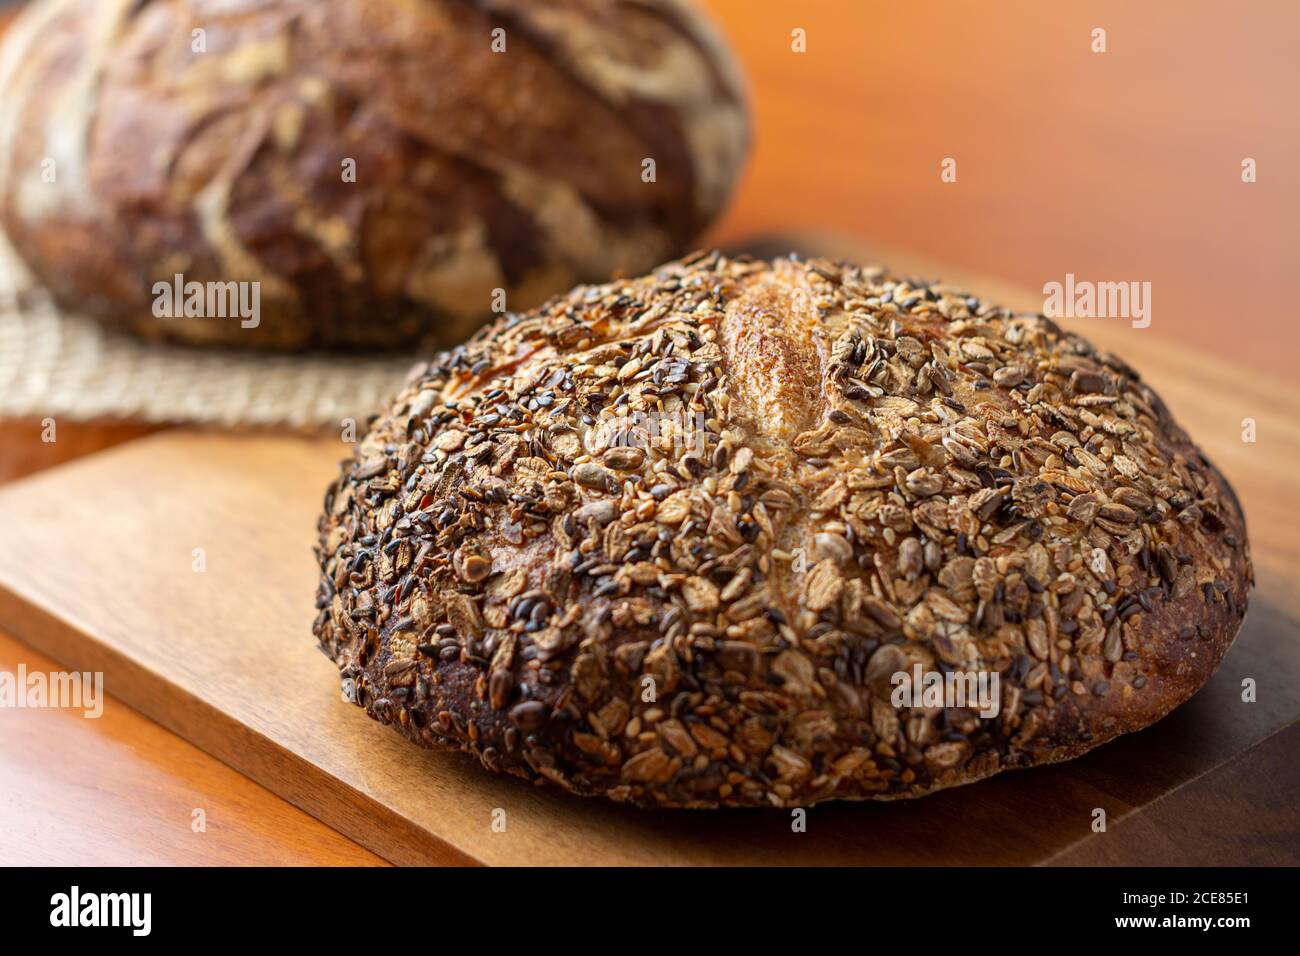 An artisan bread loaf with seeds on wooden background Stock Photo